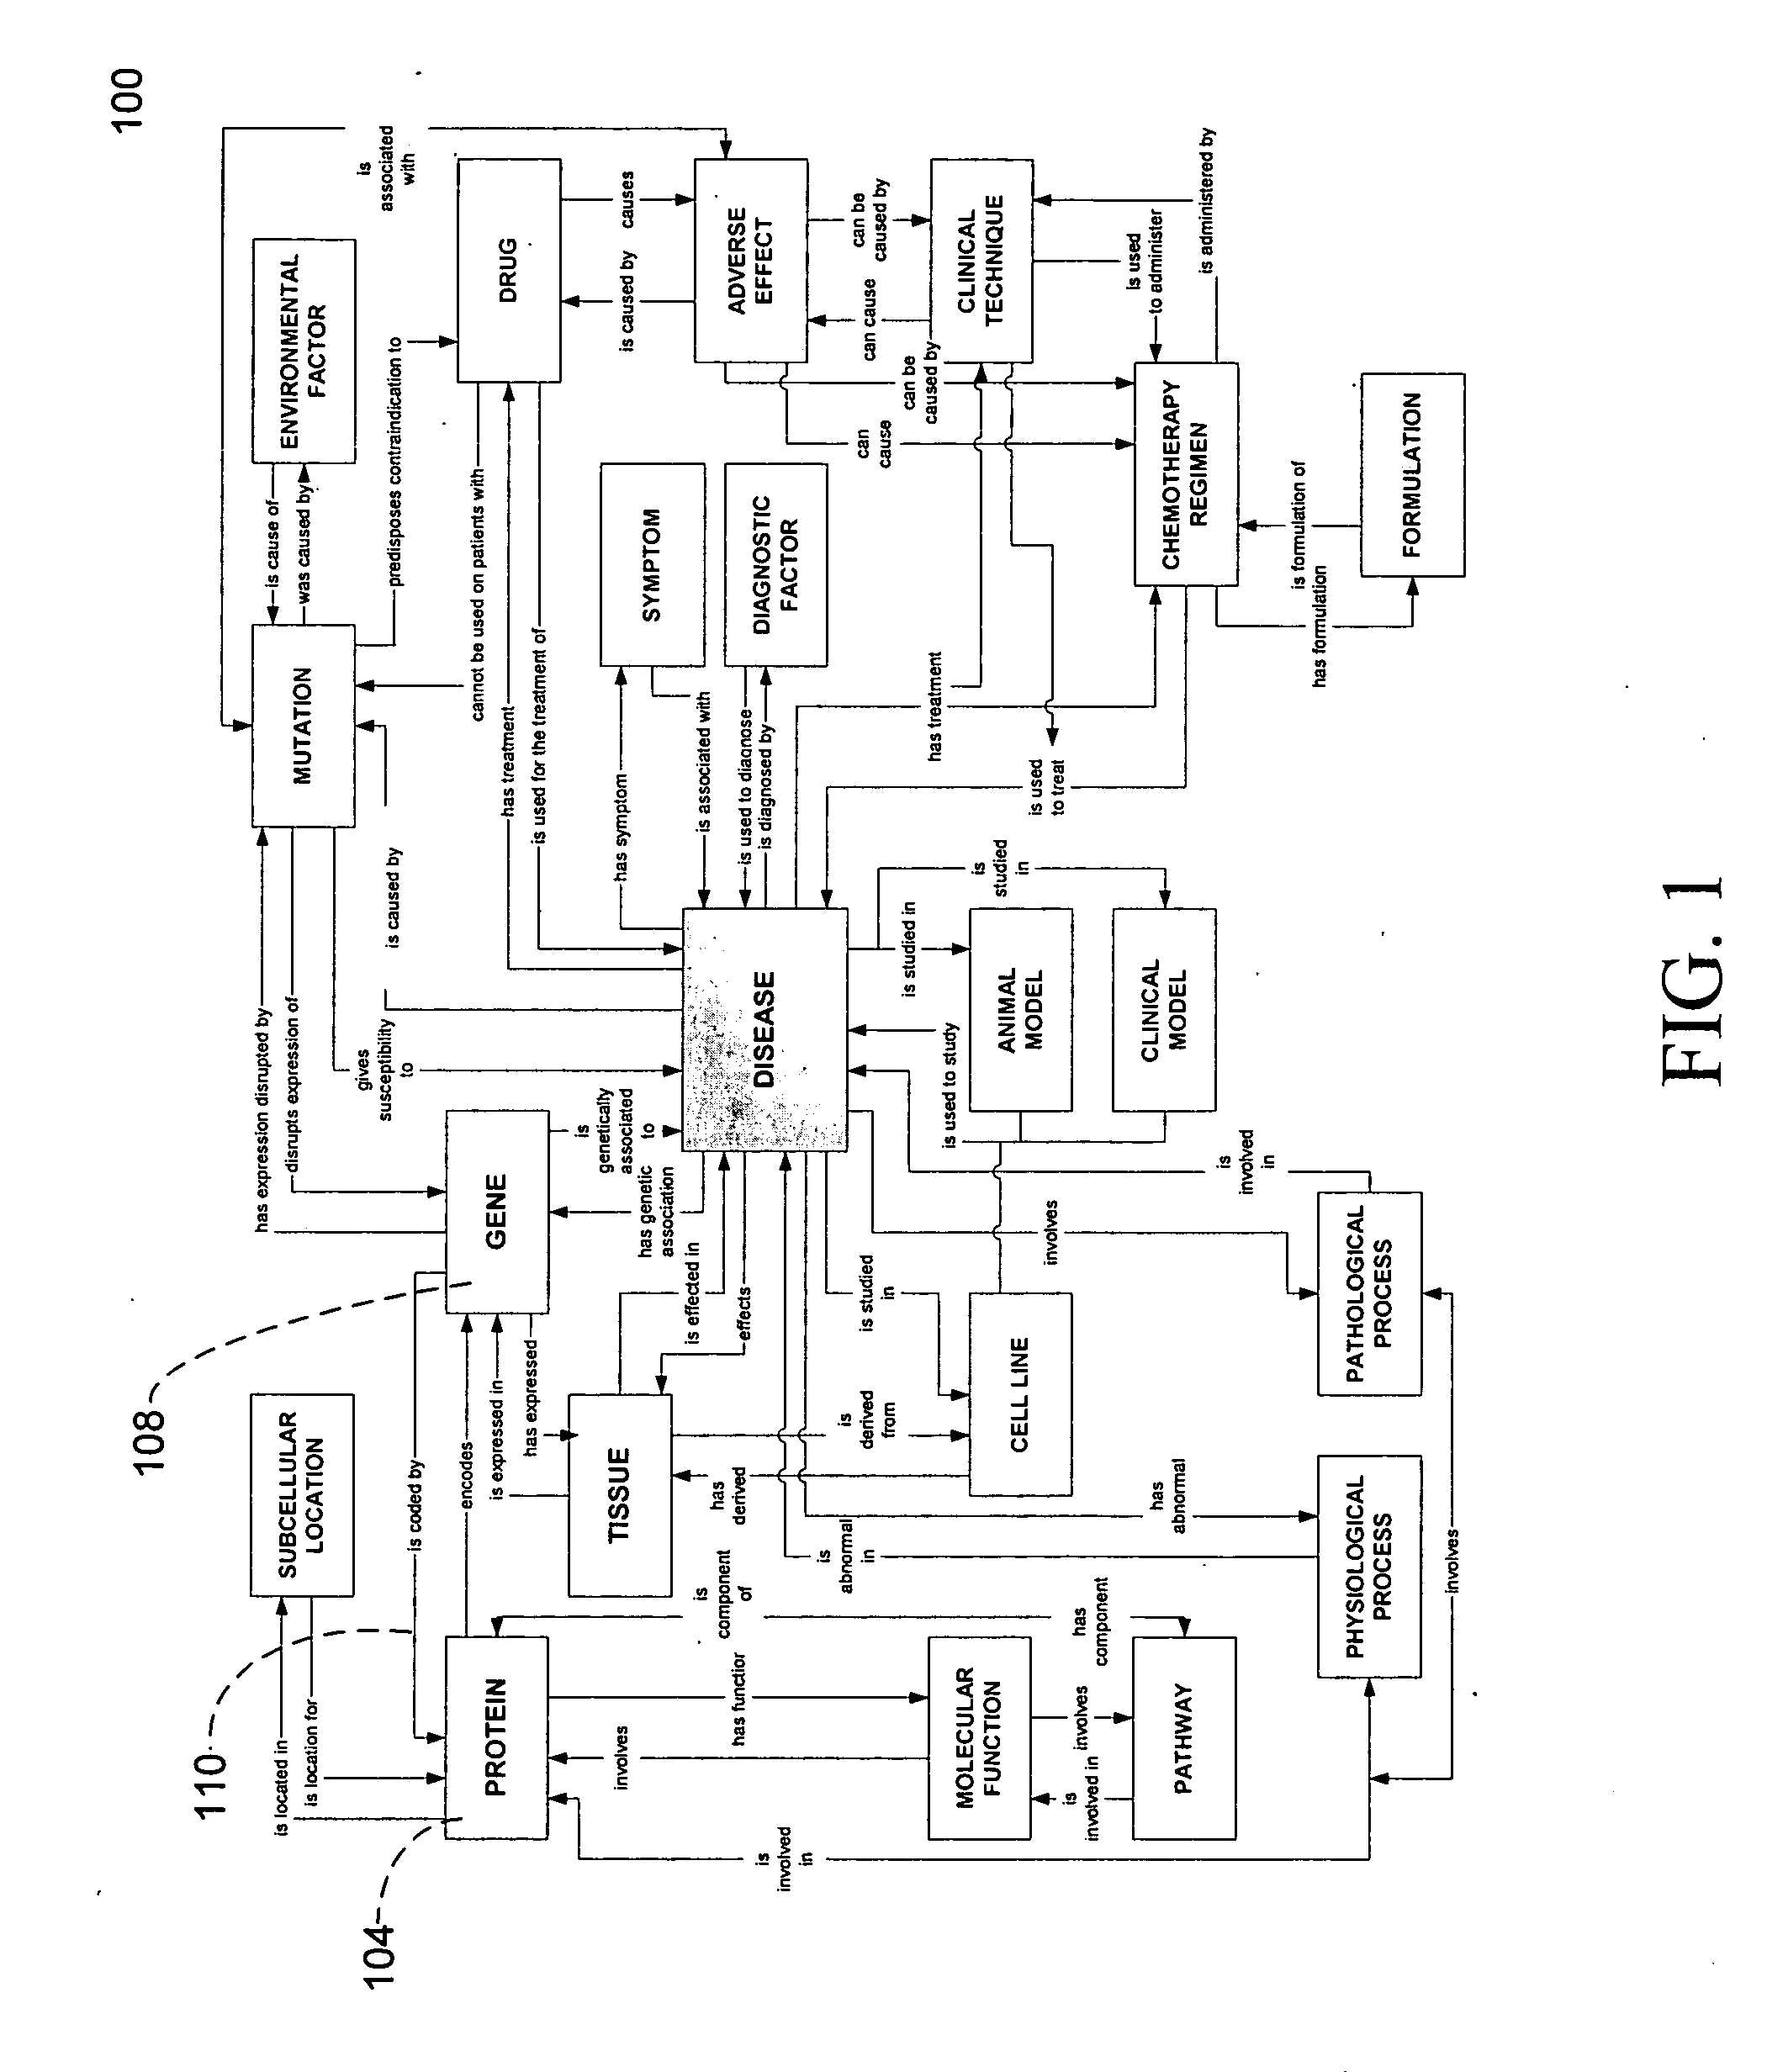 System and method for curating one or more multi-relational ontologies